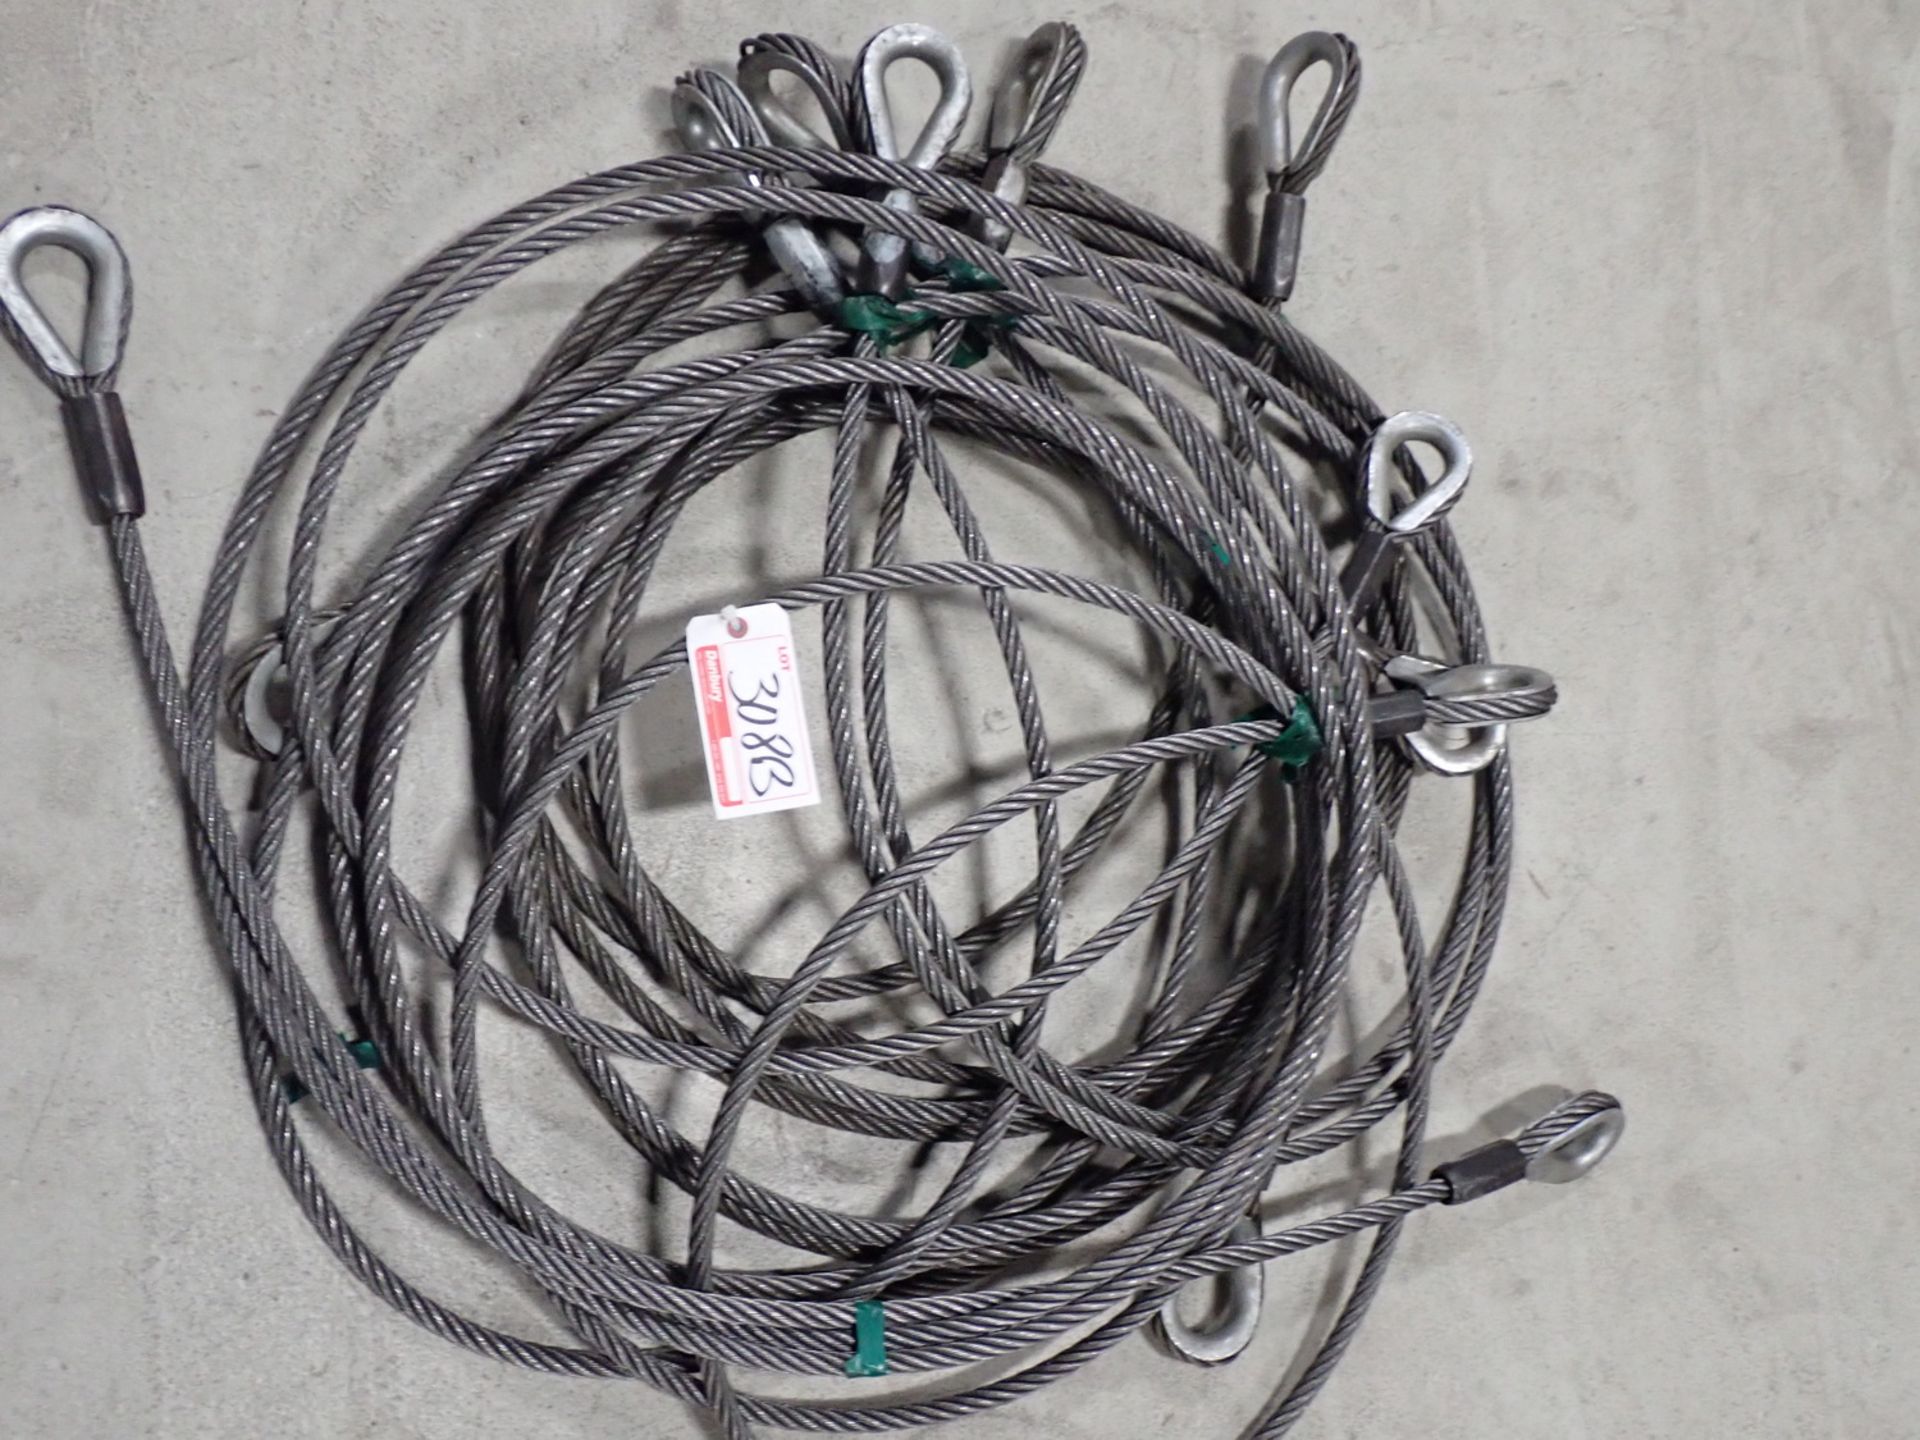 UNITS - GENERAL 3/4" X 20'L STEEL CABLE SLINGS (GREEN TAPE)